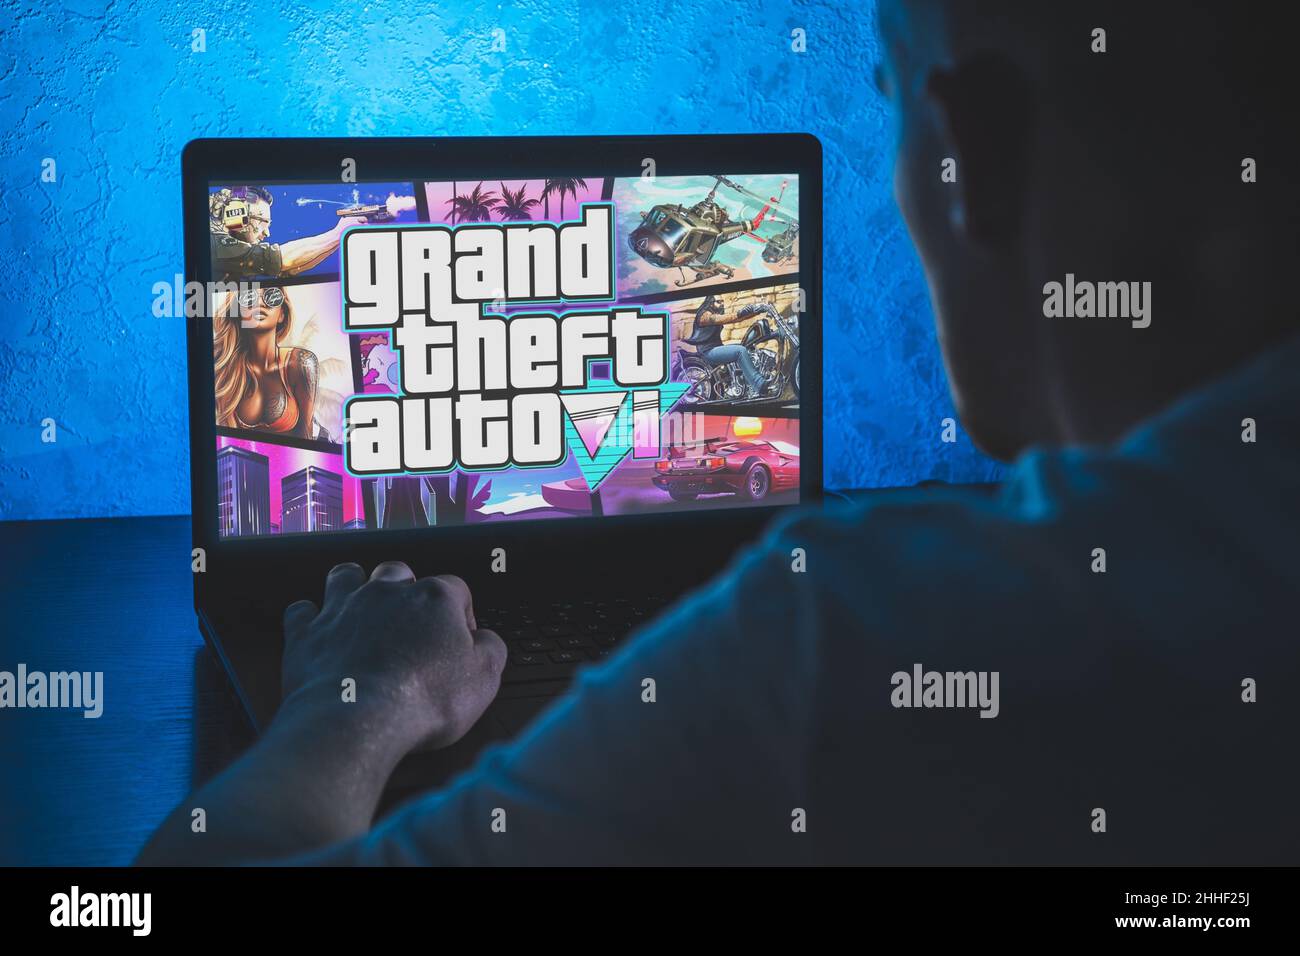 GTA VI video game. Point of view video gaming on PC. Playing computer video game. Stock Photo